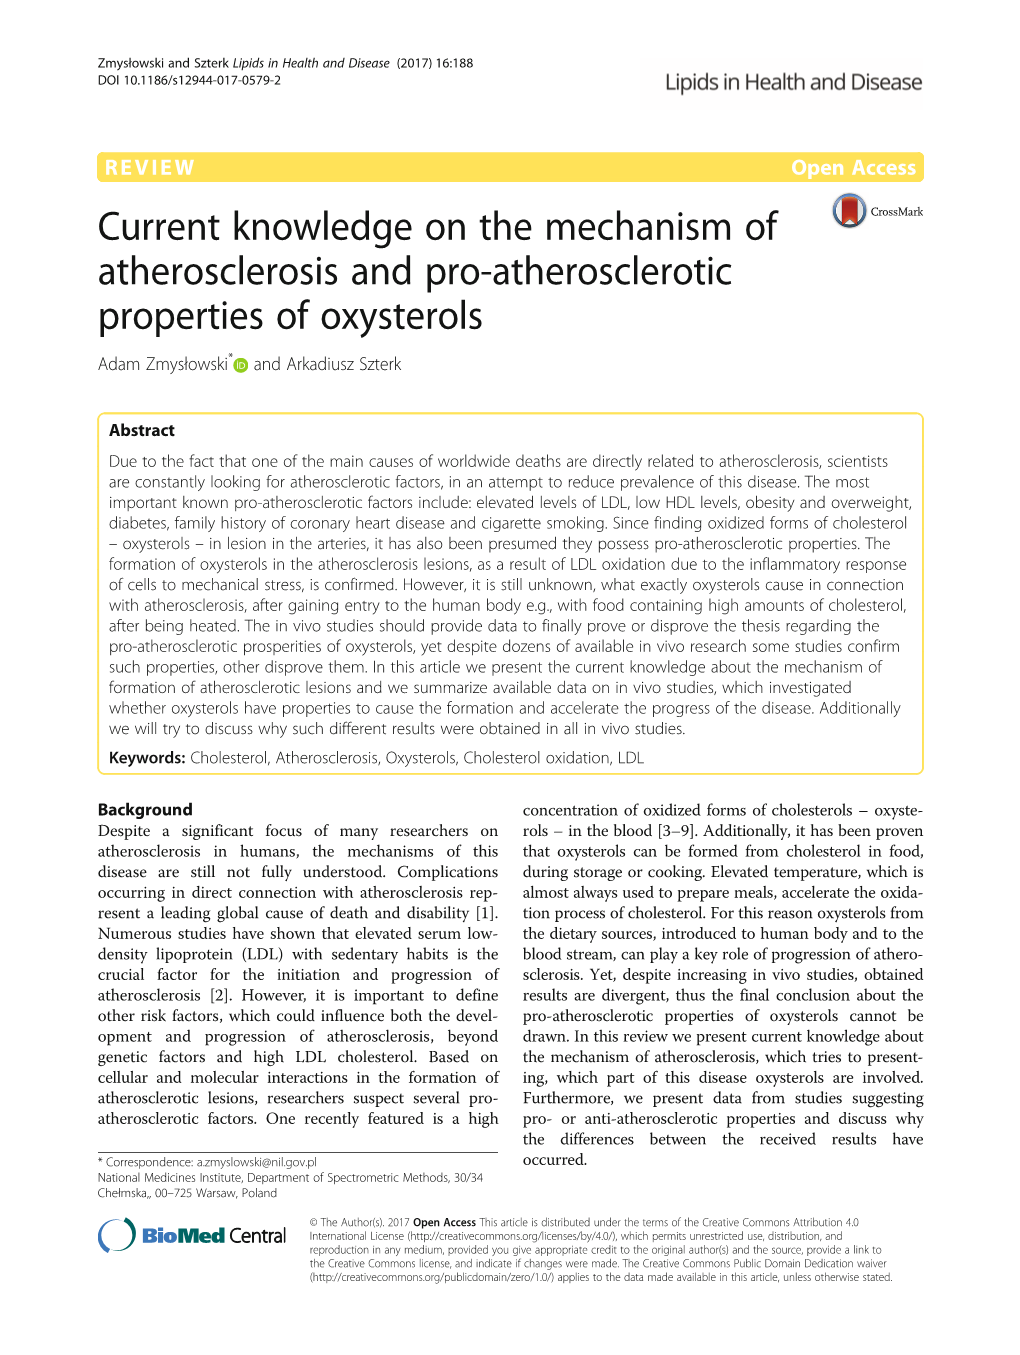 Current Knowledge on the Mechanism of Atherosclerosis and Pro-Atherosclerotic Properties of Oxysterols Adam Zmysłowski* and Arkadiusz Szterk